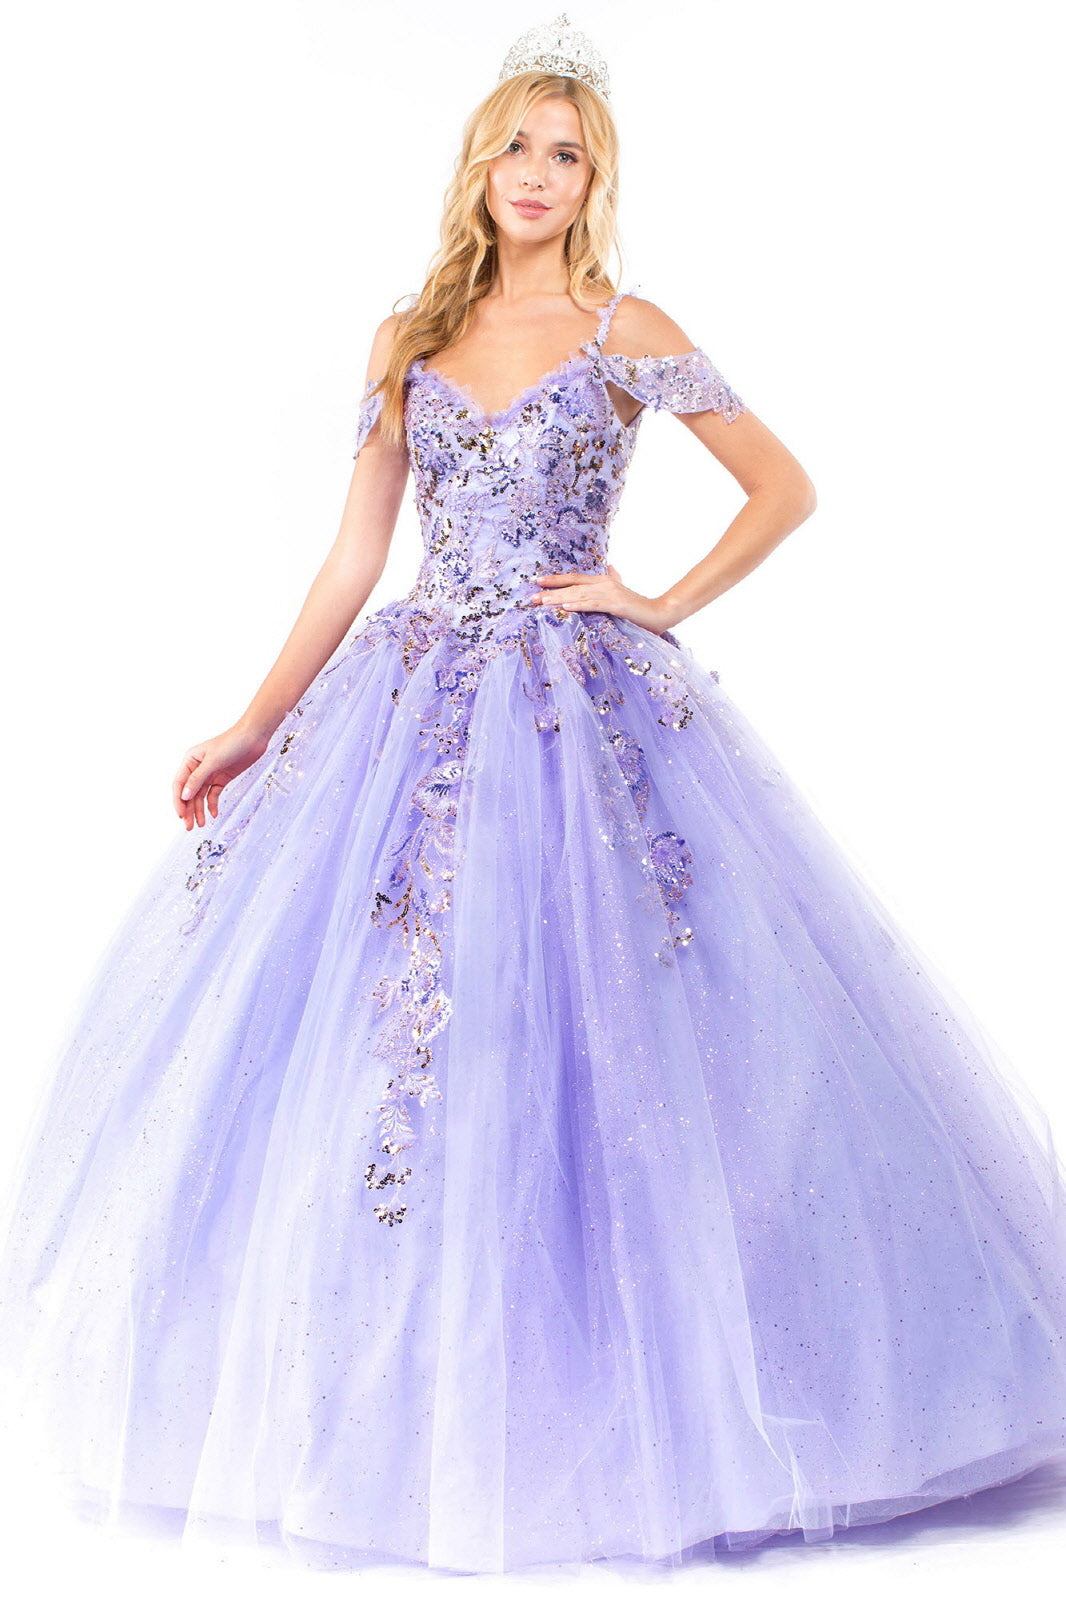 Embroidery Embellished Glitter Mesh Quinceanera Dress GLGL1969 Elsy Style QUINCEANERA